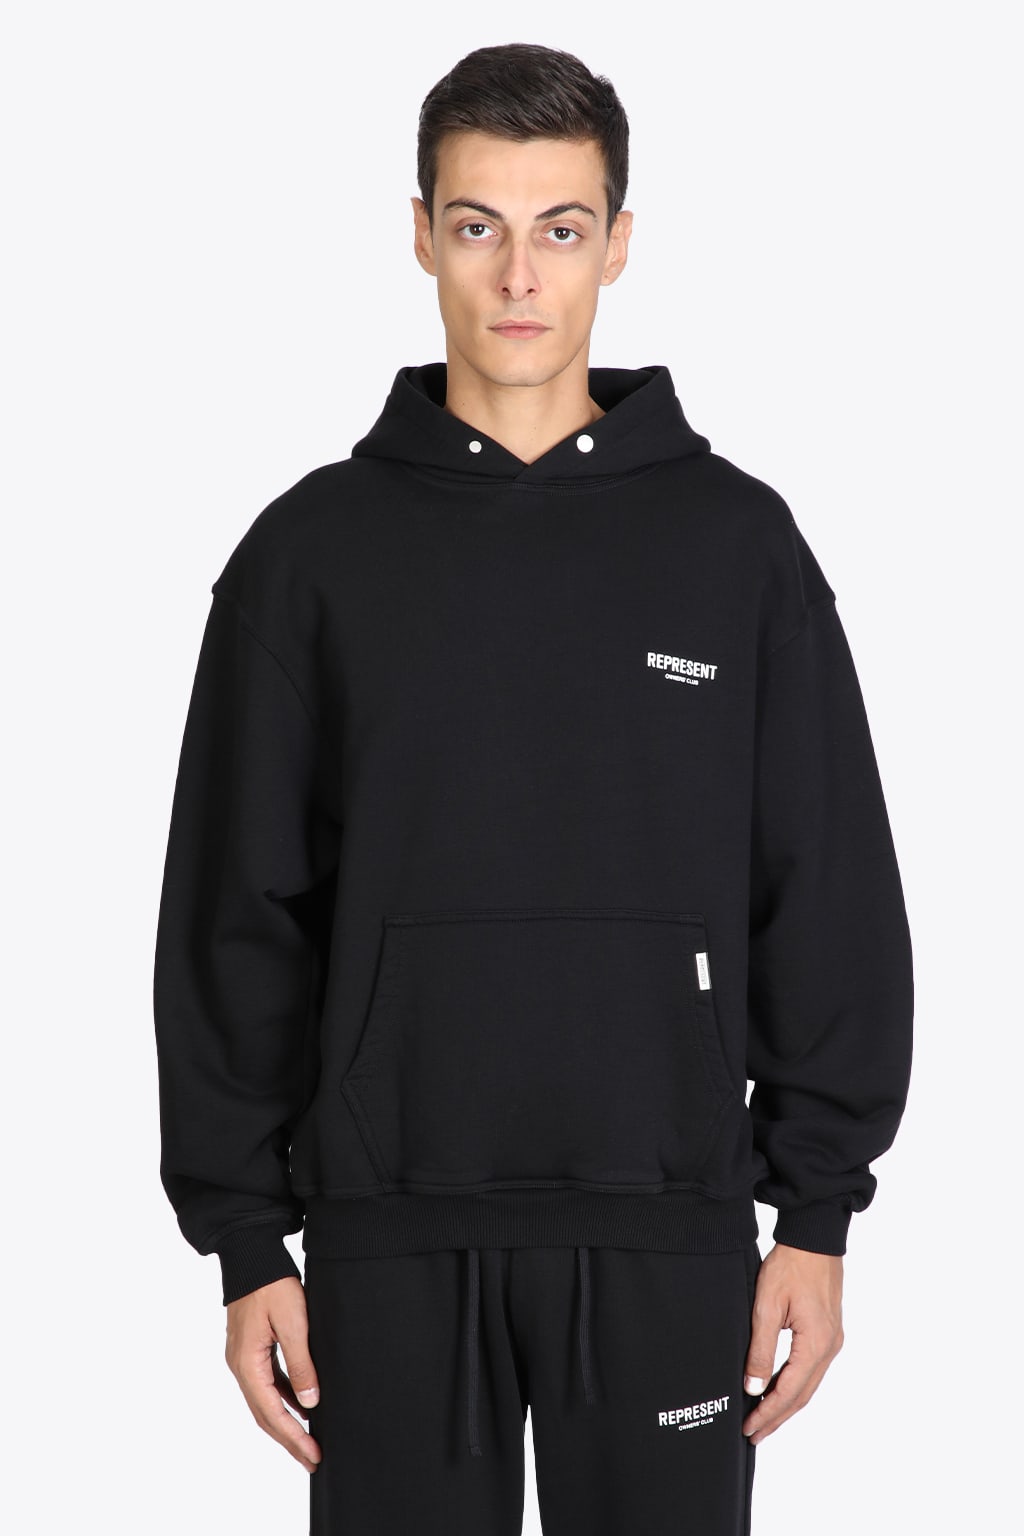 Represent Owners Club Hoodie Black cotton hoodie with logo - Owners club hoodie